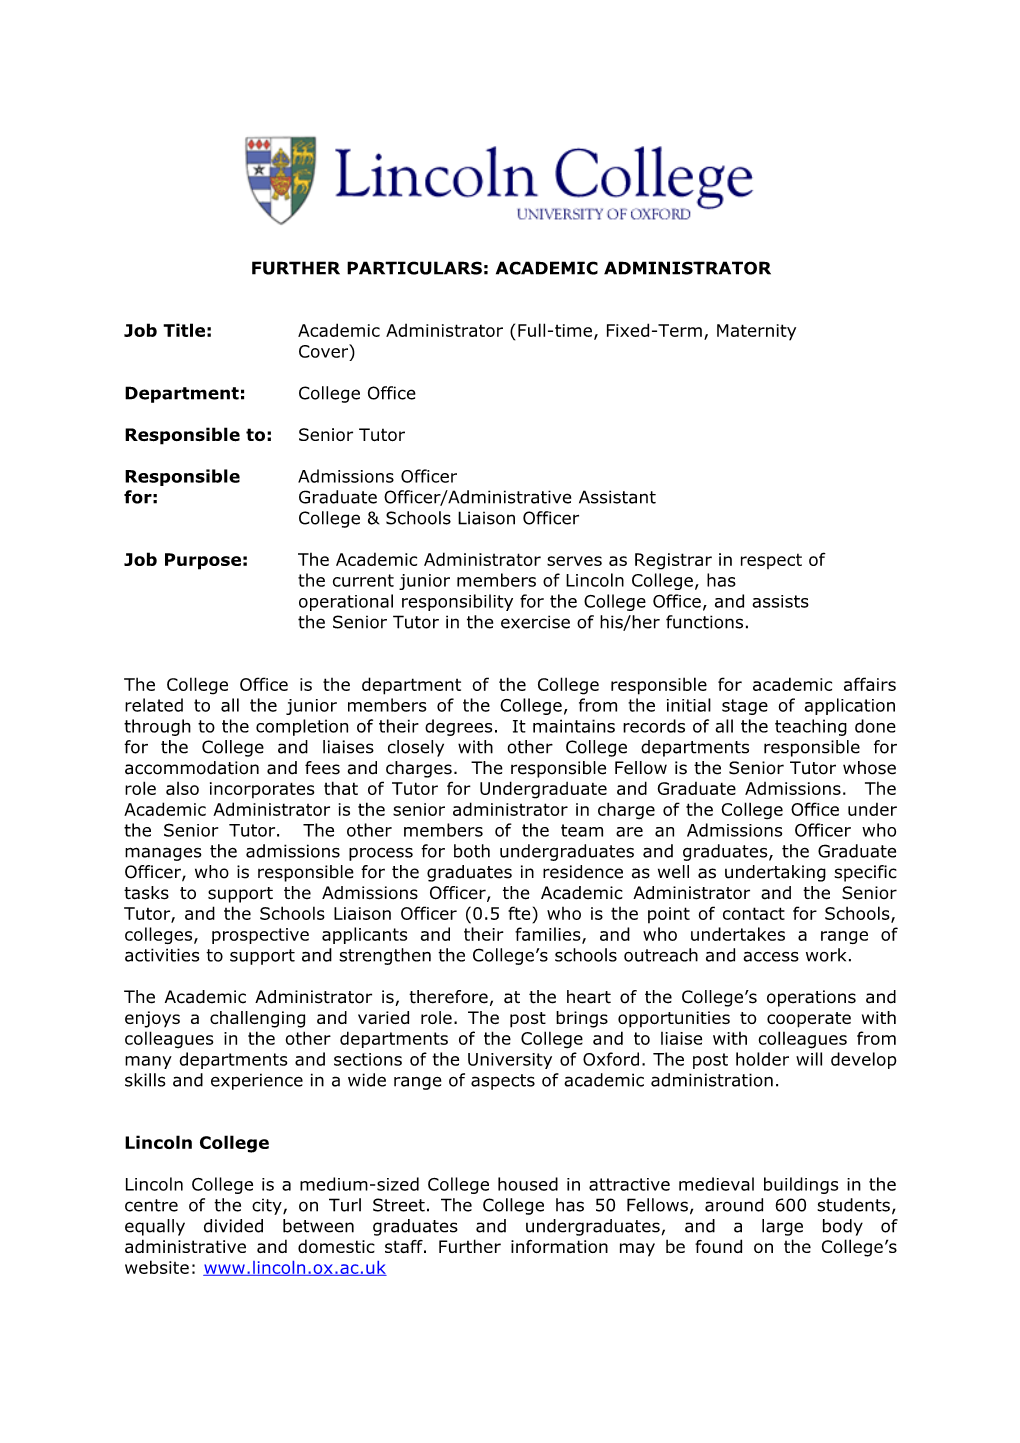 Further Particulars: Academic Administrator